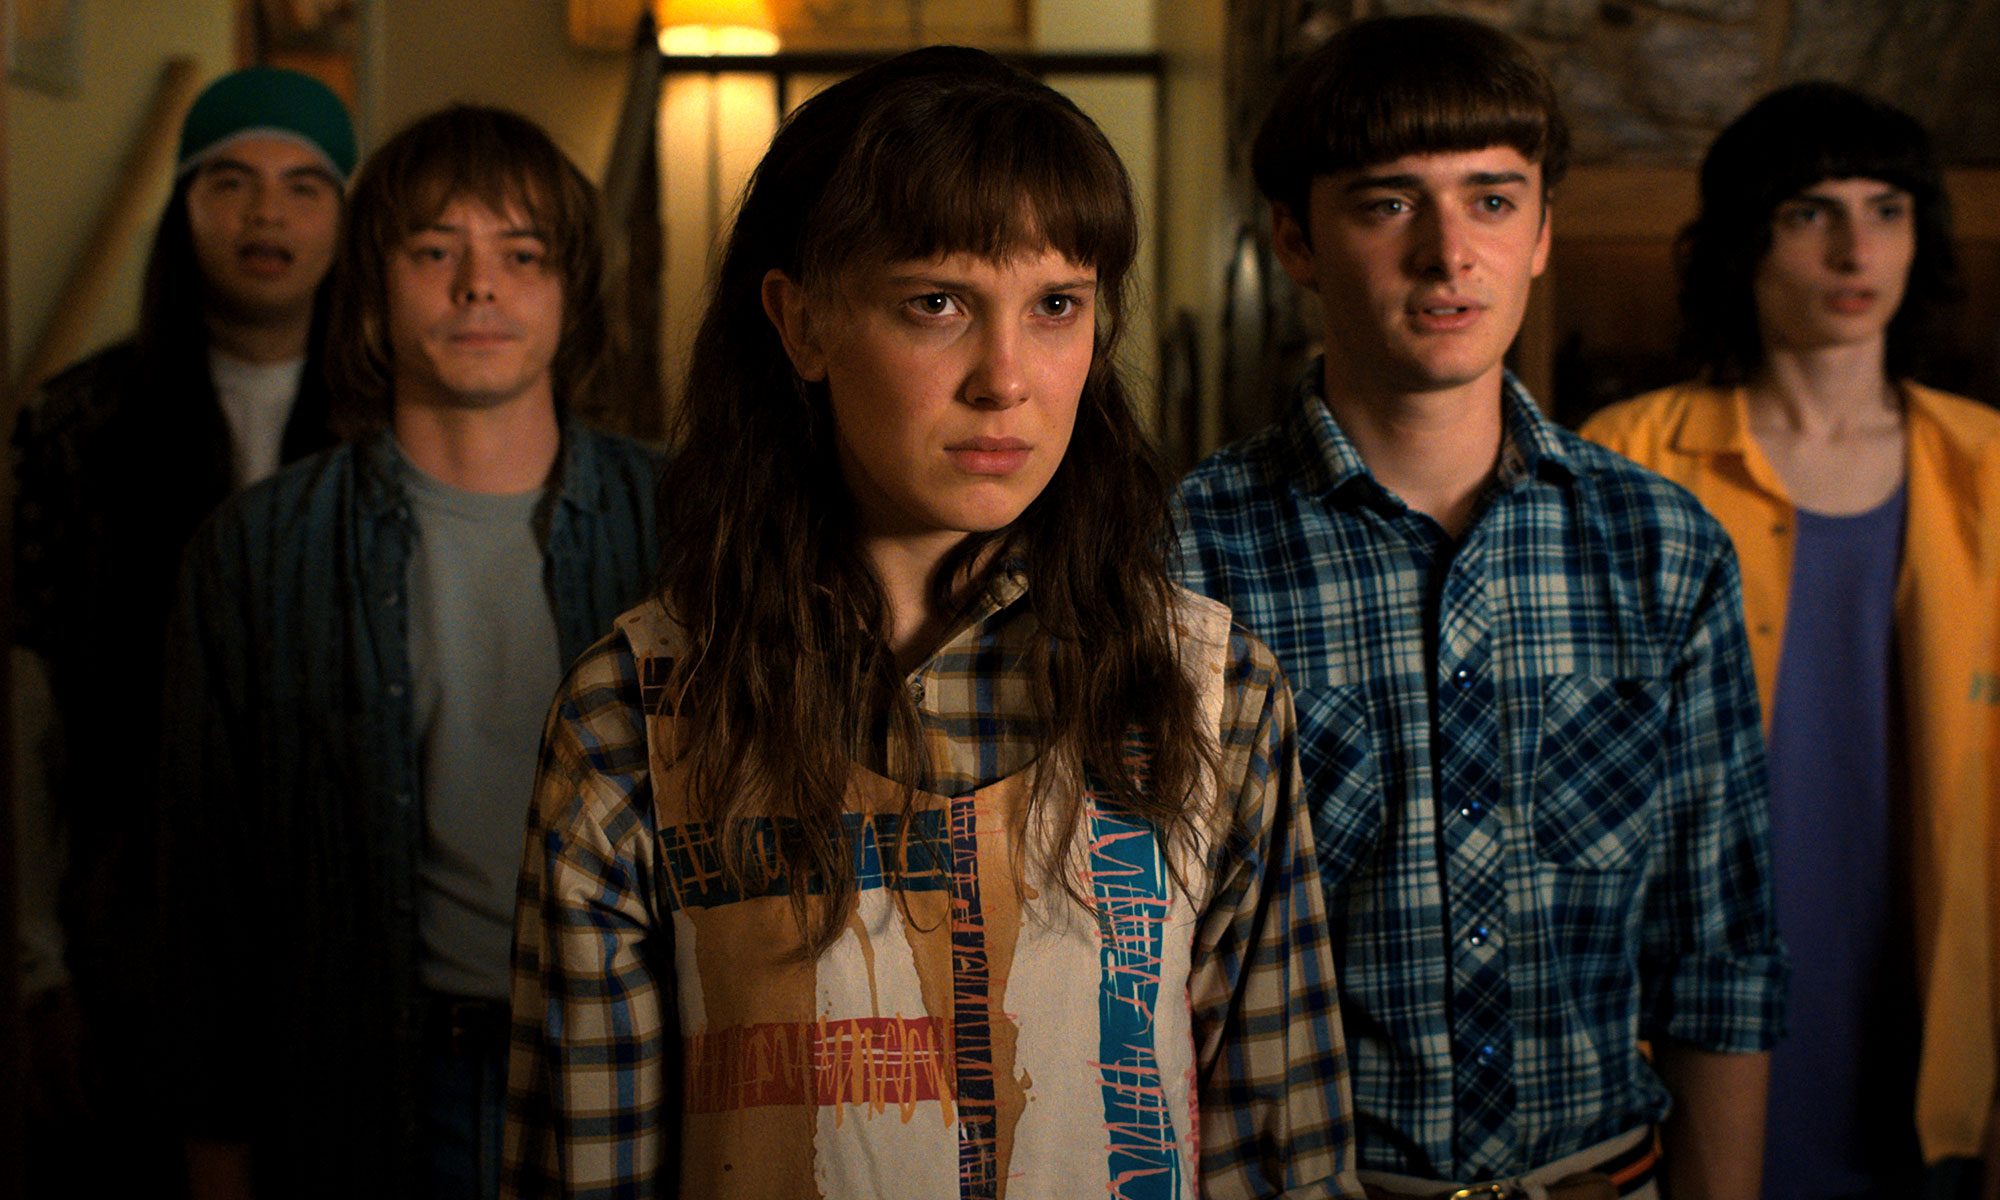 Is Max Dead or Alive After 'Stranger Things' Season 4, Volume 2?